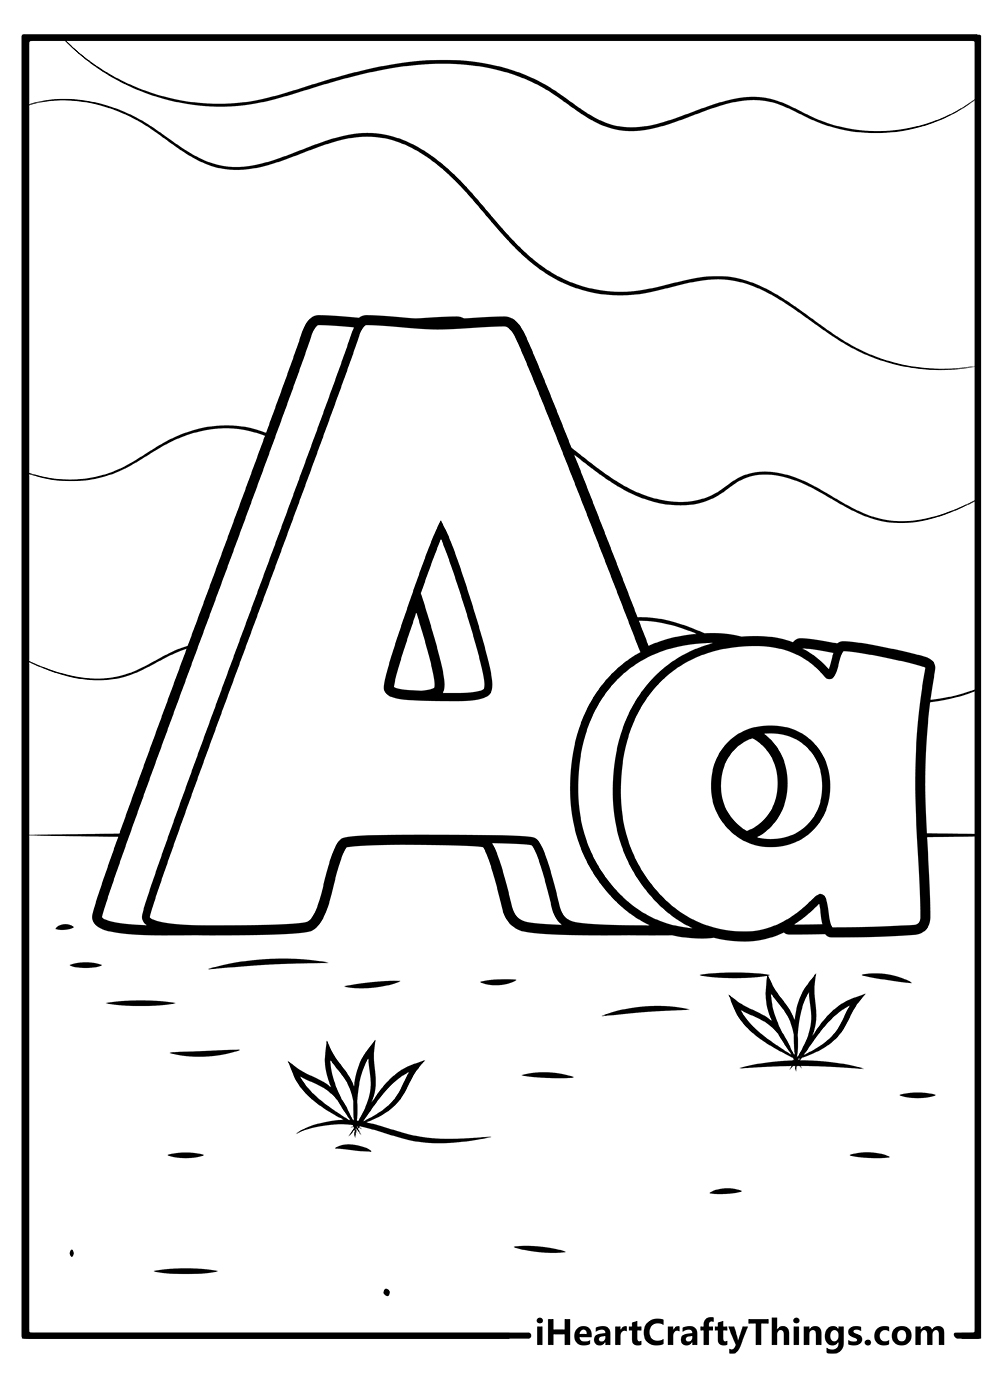 Alphabet Coloring Pages 100 Free Printables - Free Printable Alphabet Letters To Color